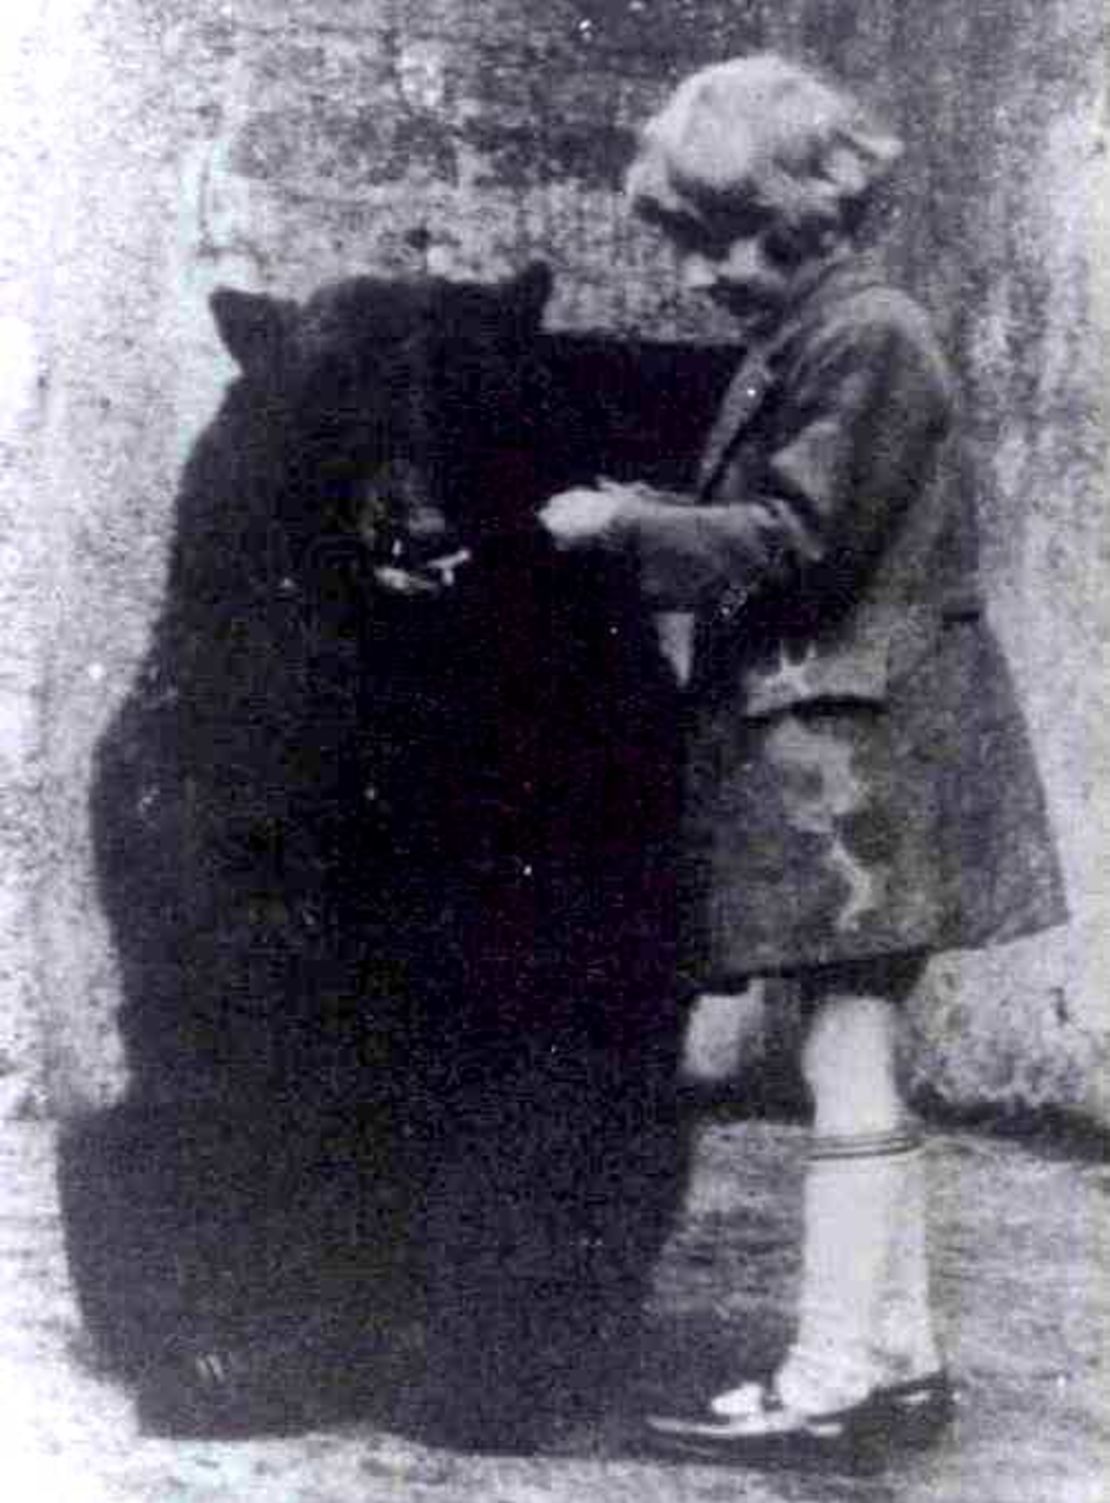 Author A.A. Milne's son, Christopher Robin, pictured here with the original black bear who inspired "Winnie-the-Pooh." 